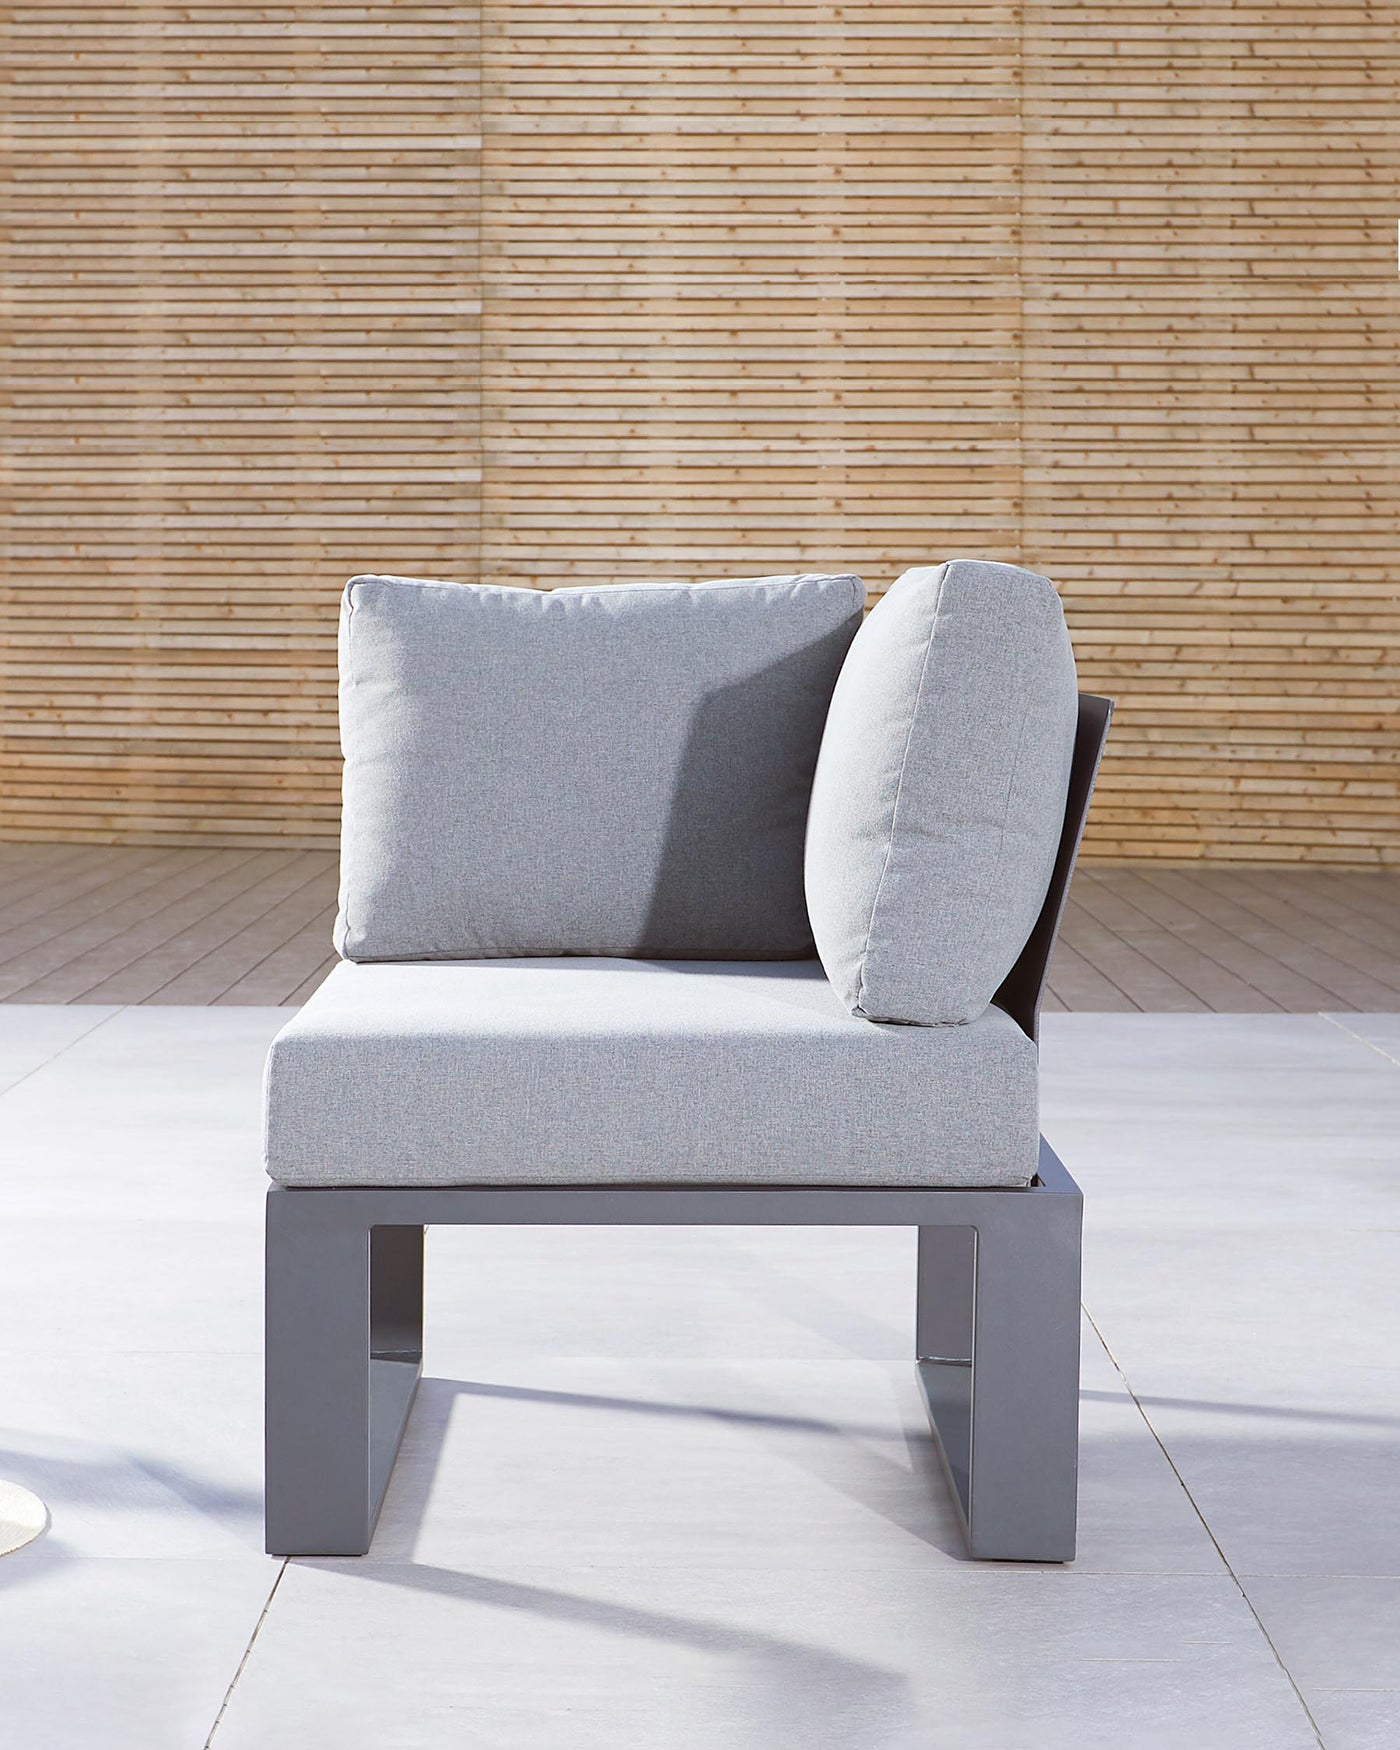 Modern single-seater sofa with a light grey fabric cushioned seat and backrest, complemented by a cylindrical side cushion, featuring a sleek metallic base and set against a warm bamboo backdrop.